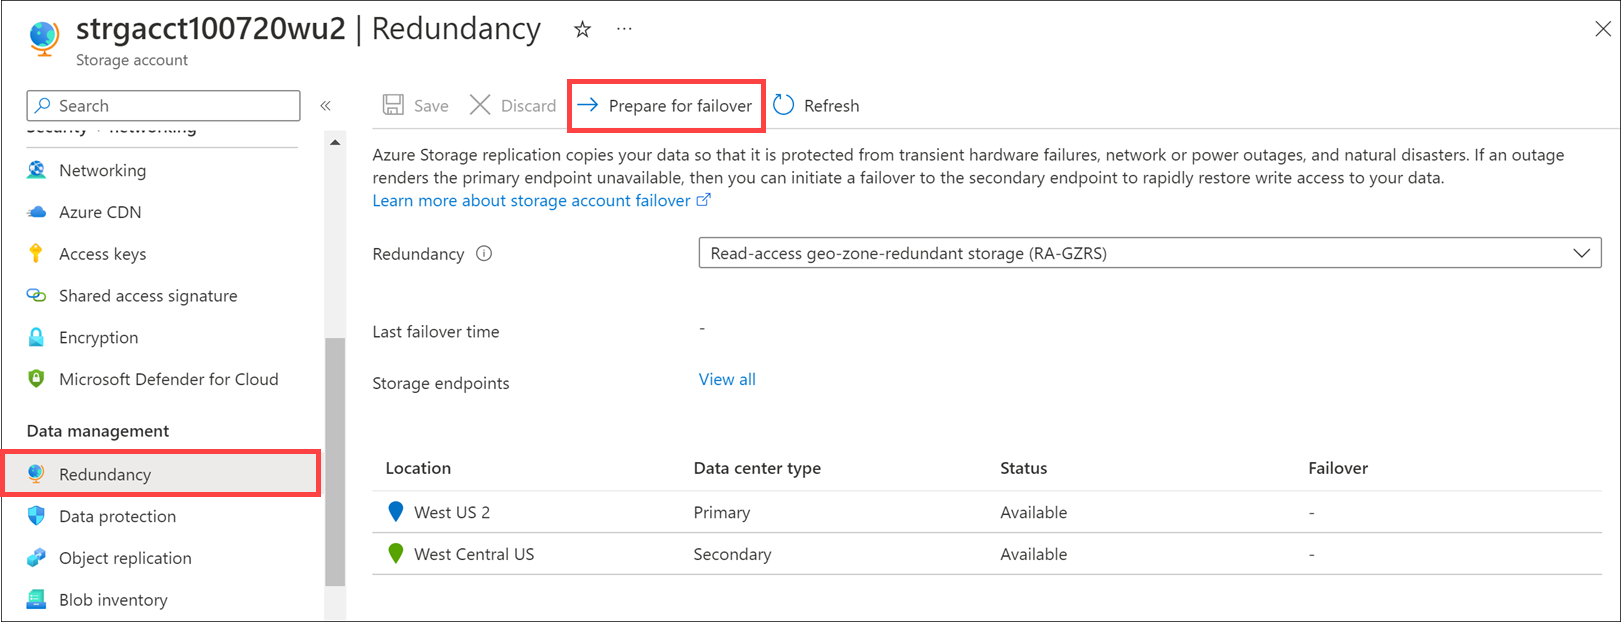 Screenshot of the Prepare for failover button on Storage account > Redundancy in the Azure portal.